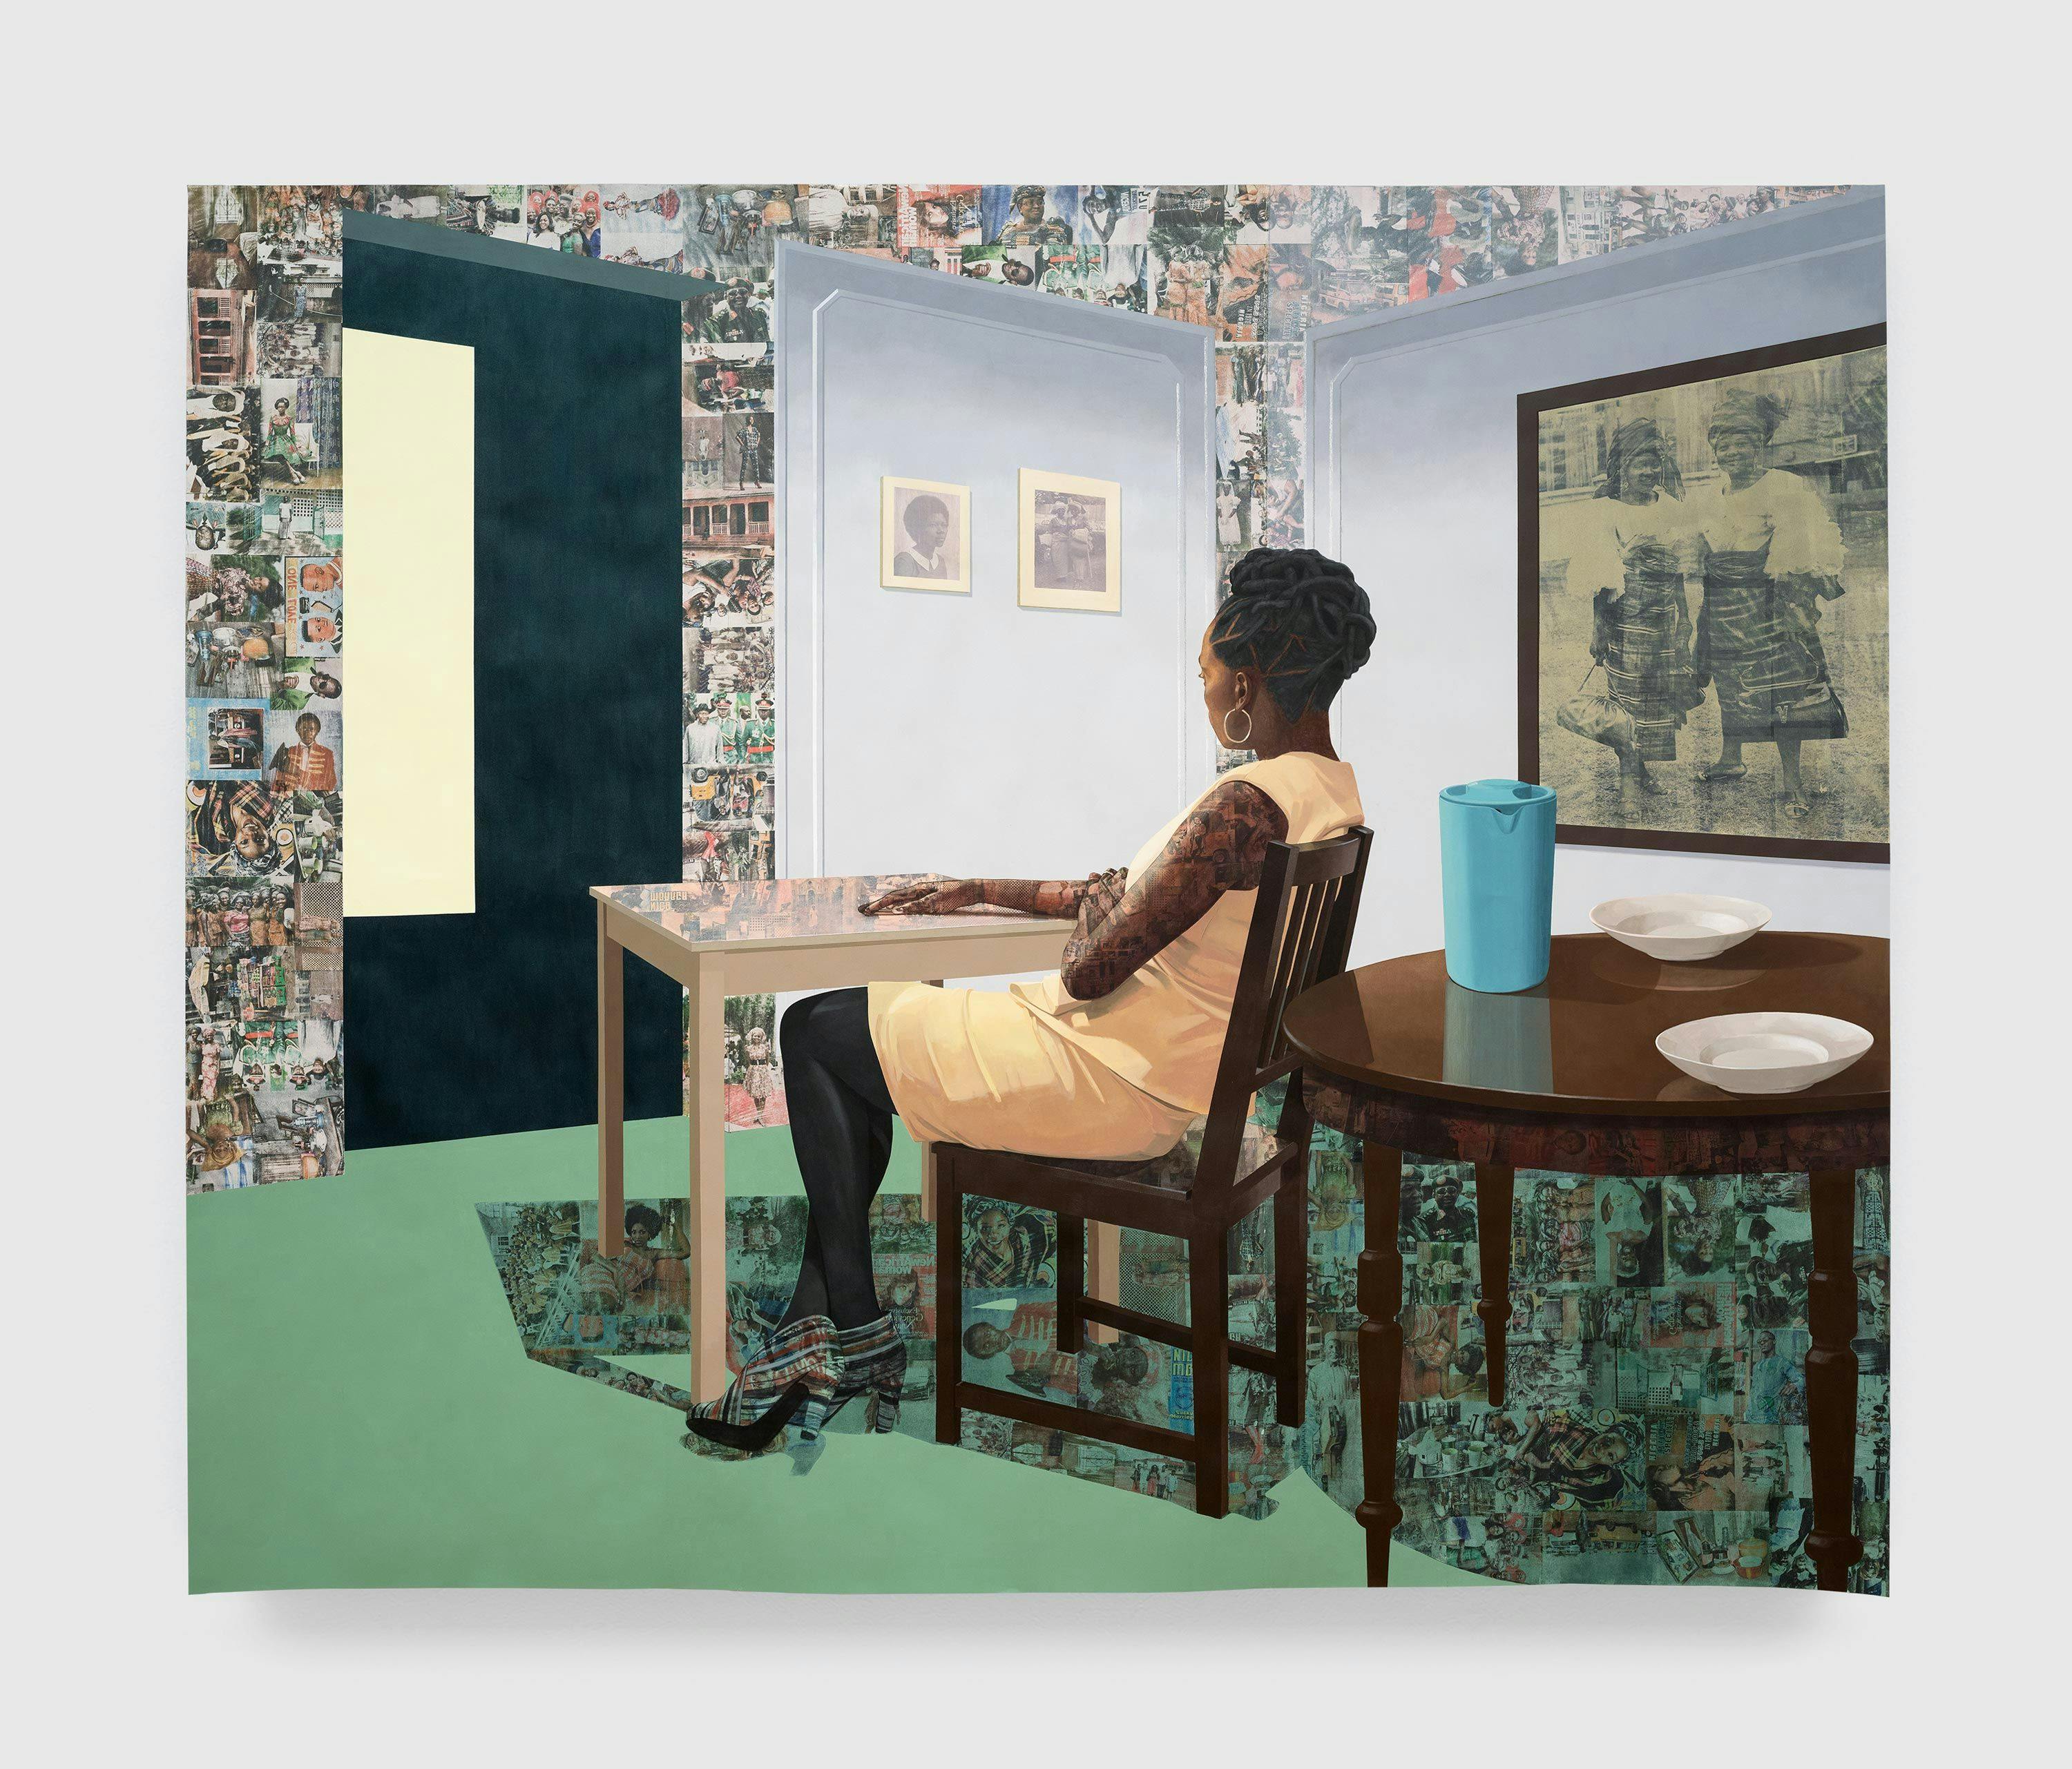 A work on paper by Njideka Akunyili Crosby, titled In The Lavender Room, dated 2019.